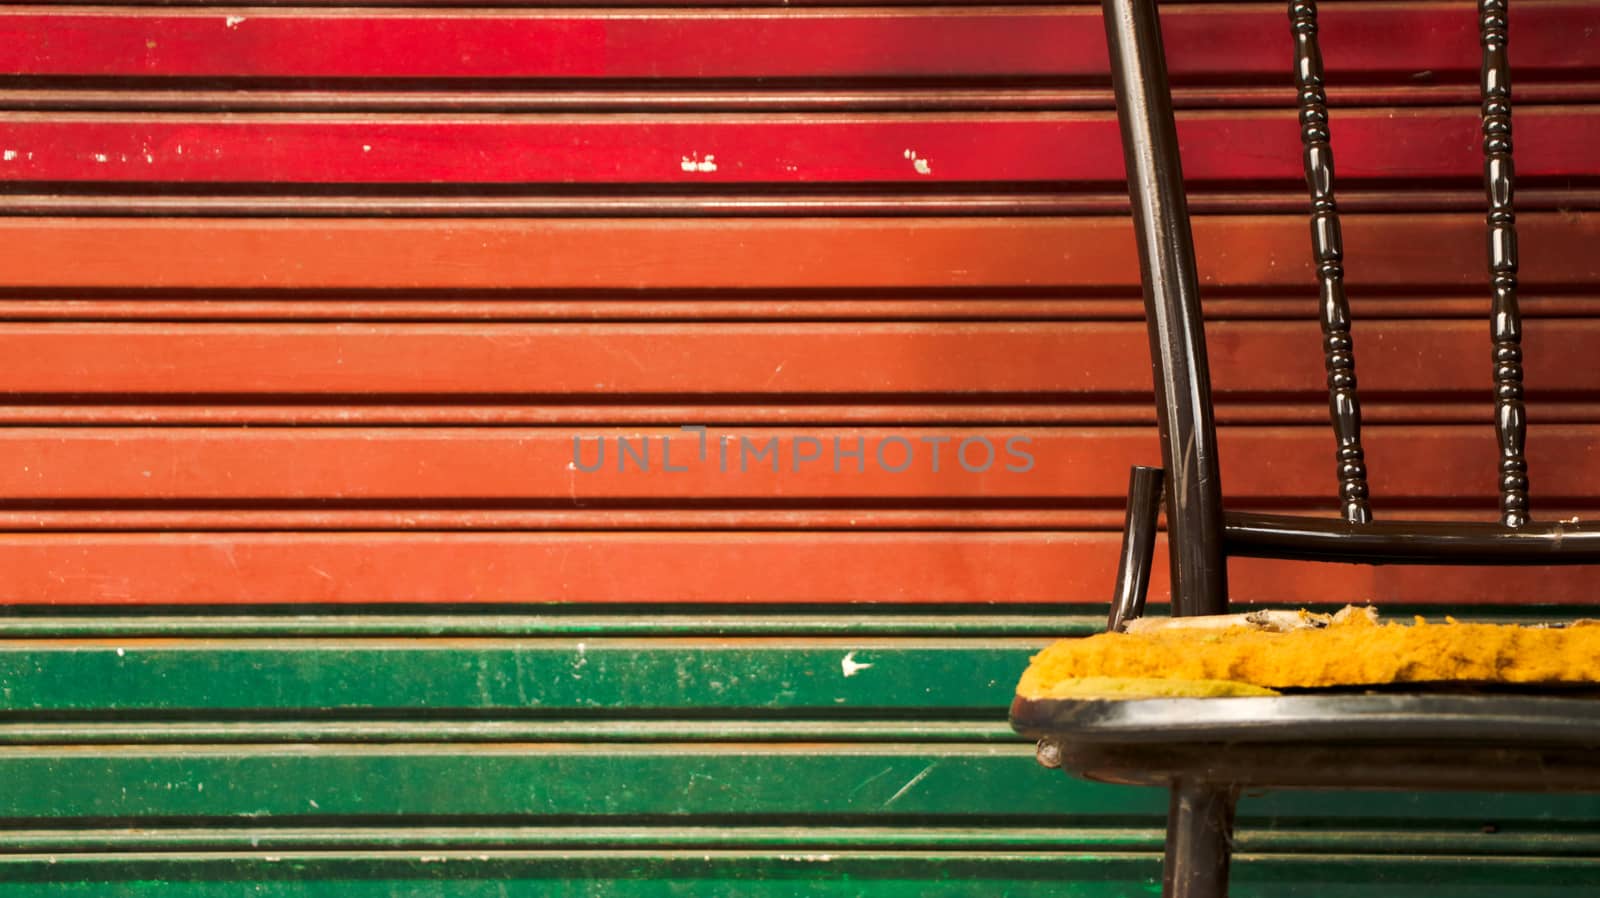 Abandoned Vintage Metal Chair with Colorful Roller Shutter Door/ Corrugated Iron Background. Outdoor Garage/ Junkyard. Street Photography. Bangkok, Thailand.